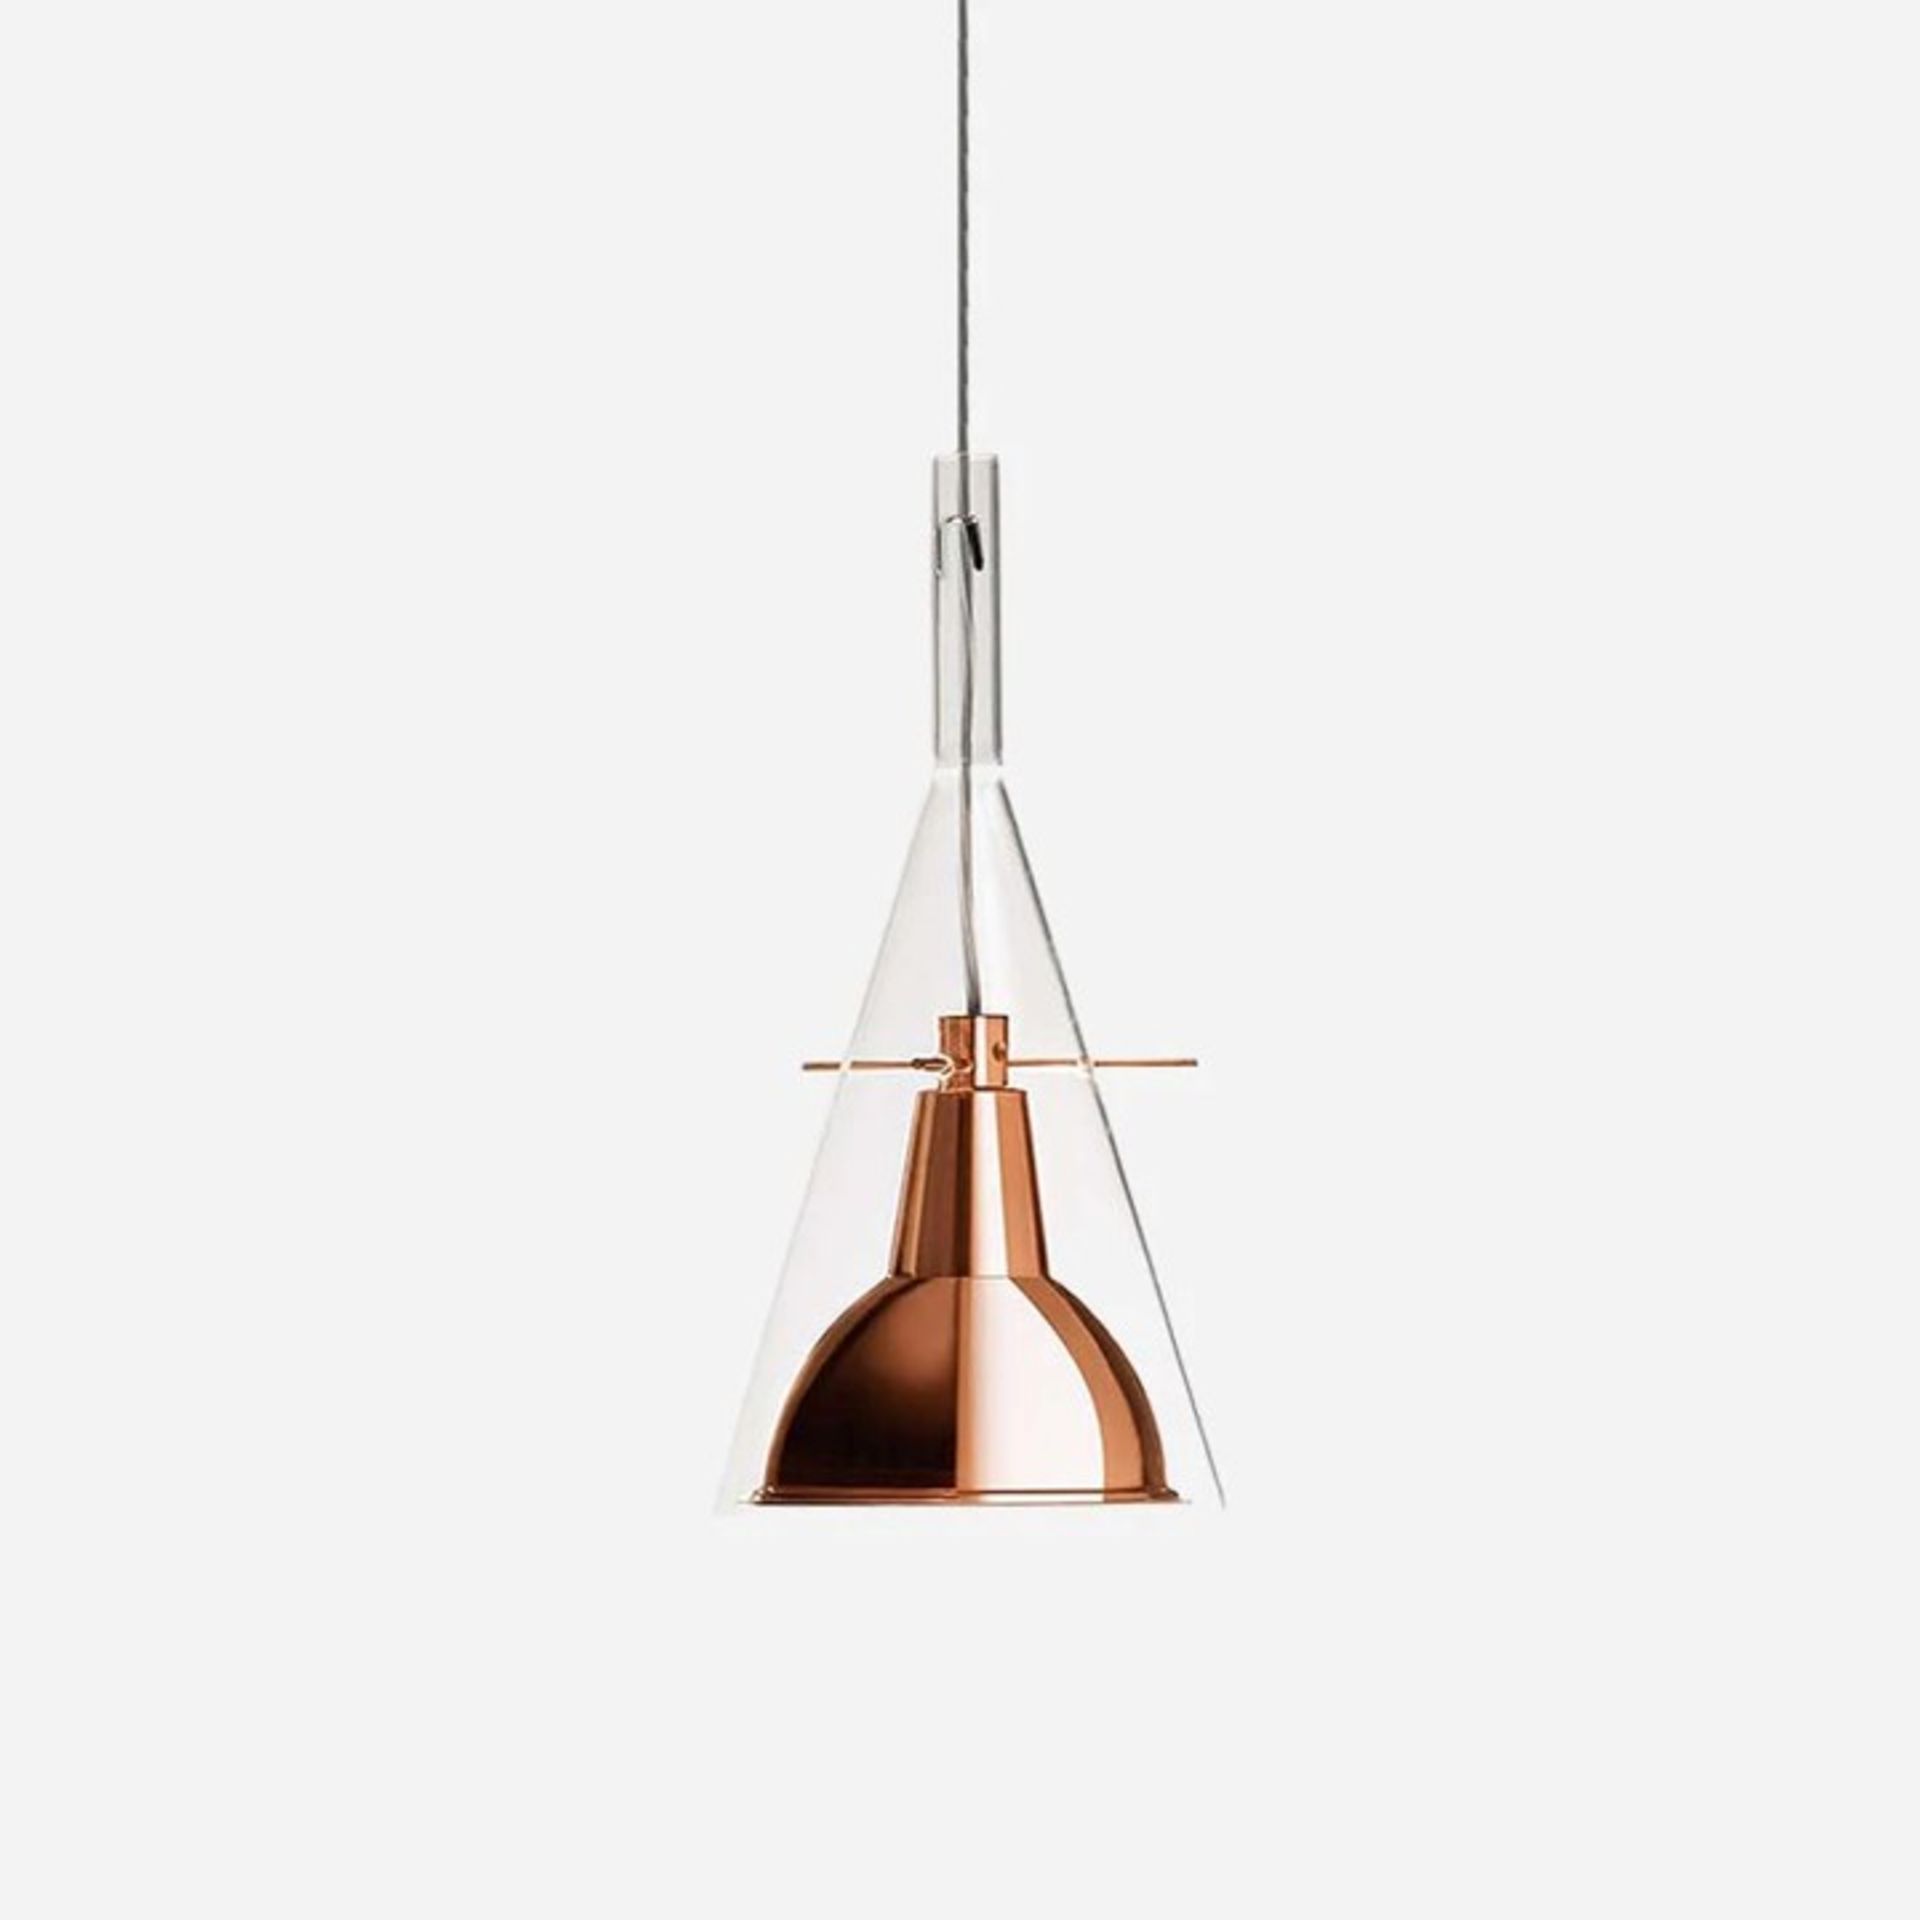 *30 ILite Pendant Lamp Item No.NHB2106CP-250 (gold, and copper)